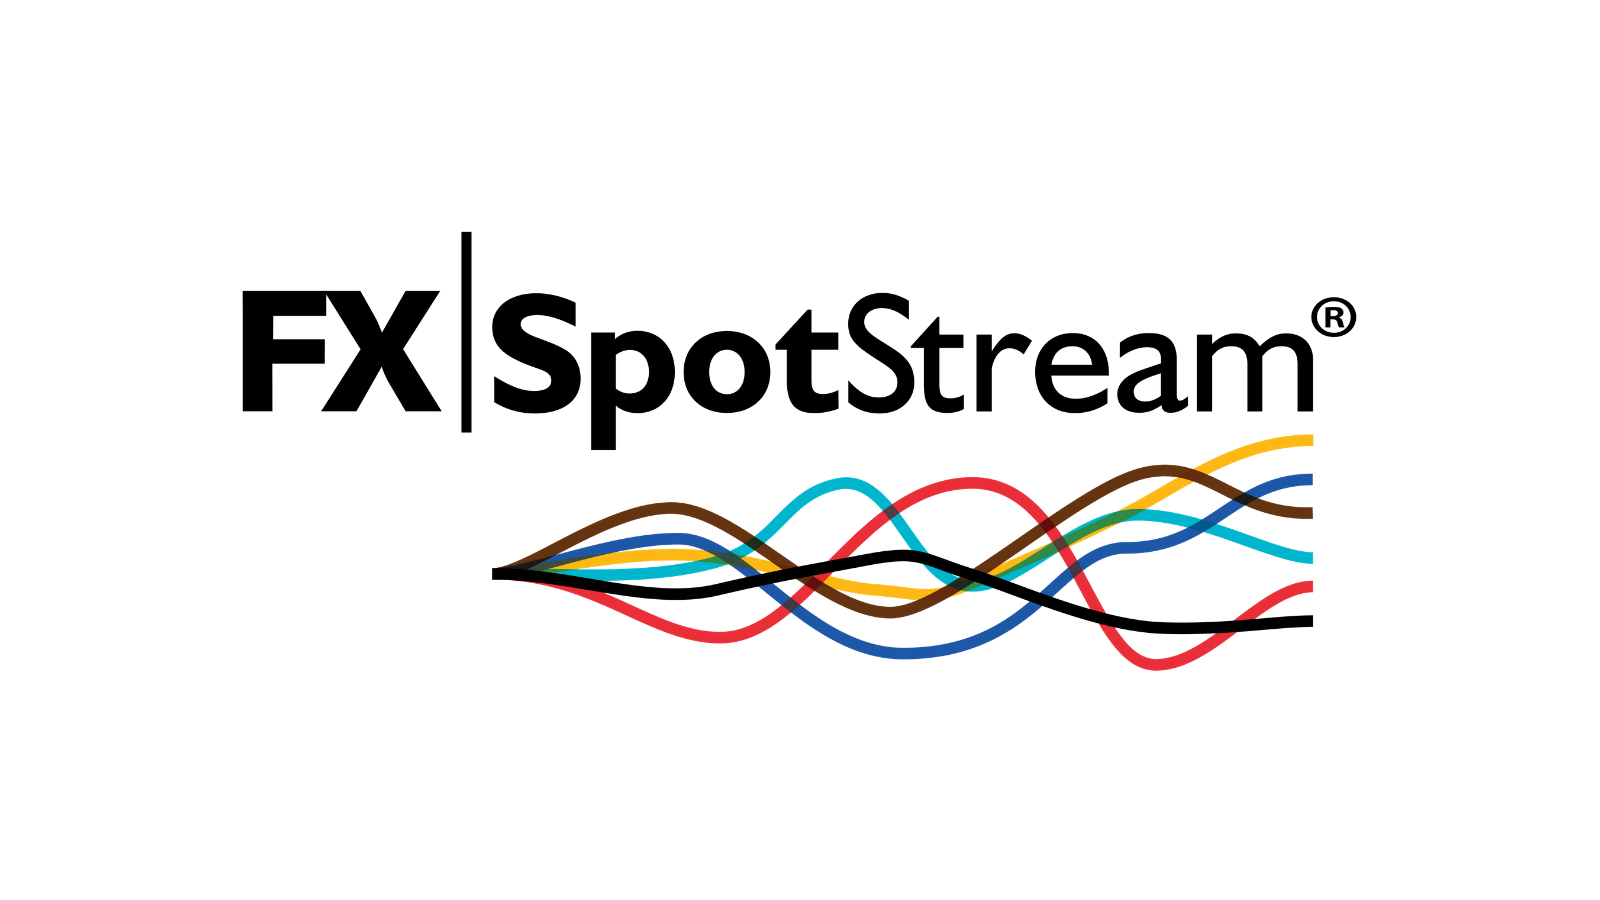 FXSpotStream Goes Live With Algos And Allocations Functionality Over Its API